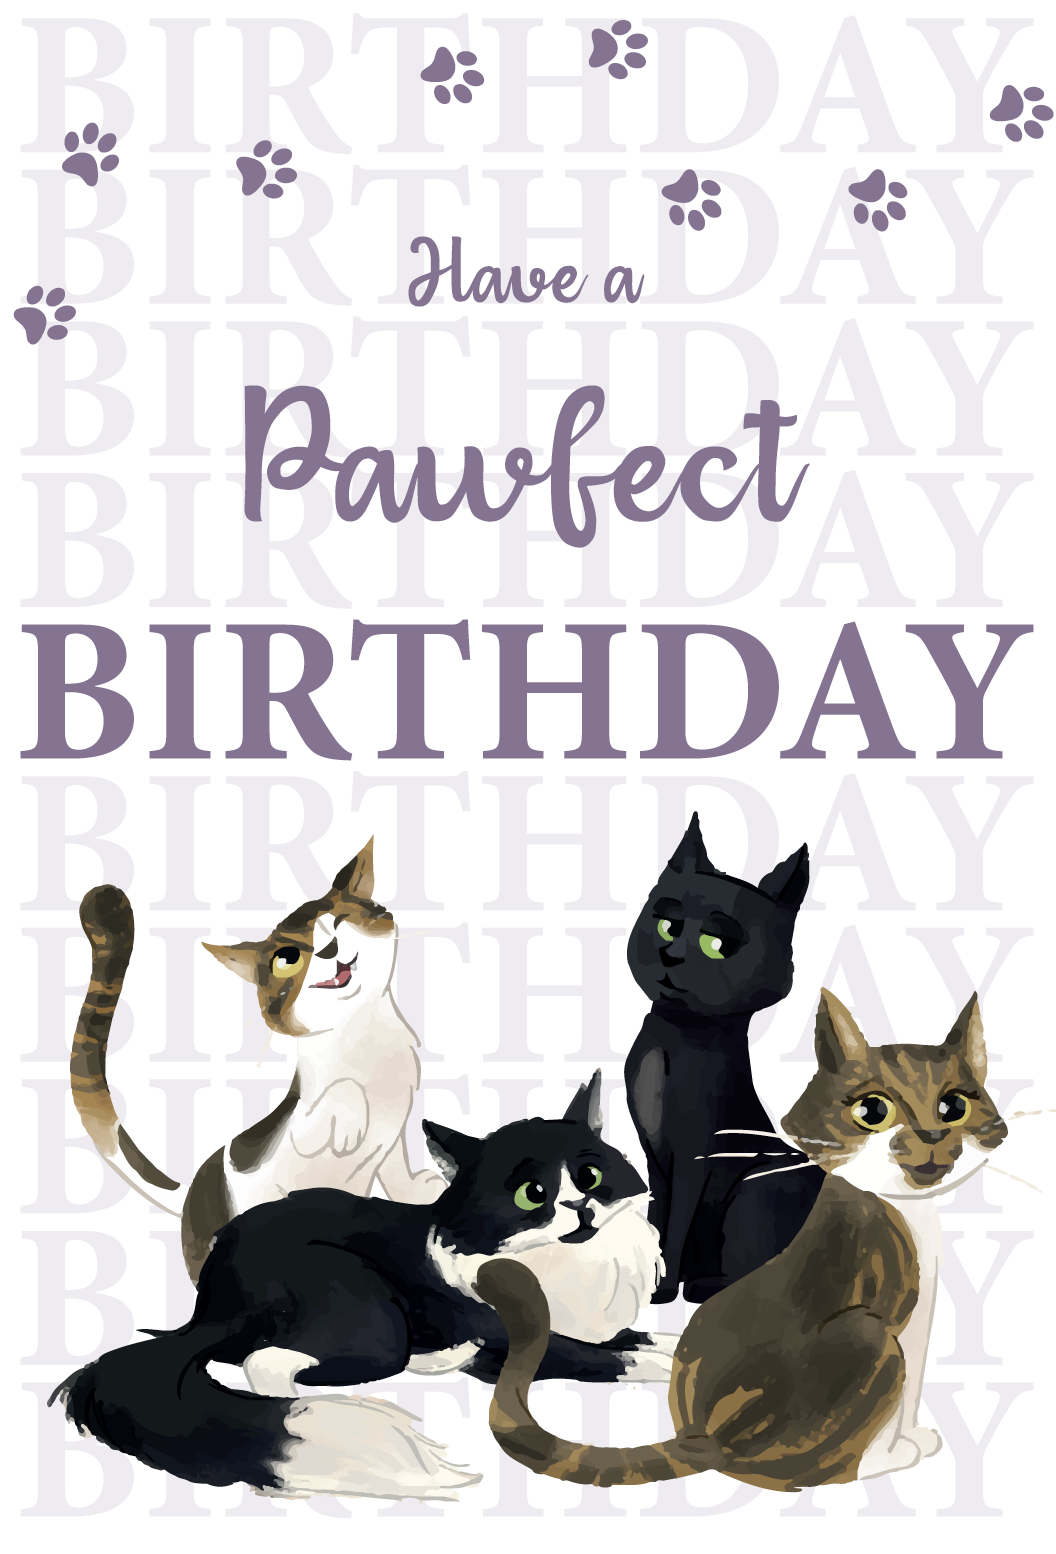 Birthday Card All Cute Cats Have a Pawfect Birthday